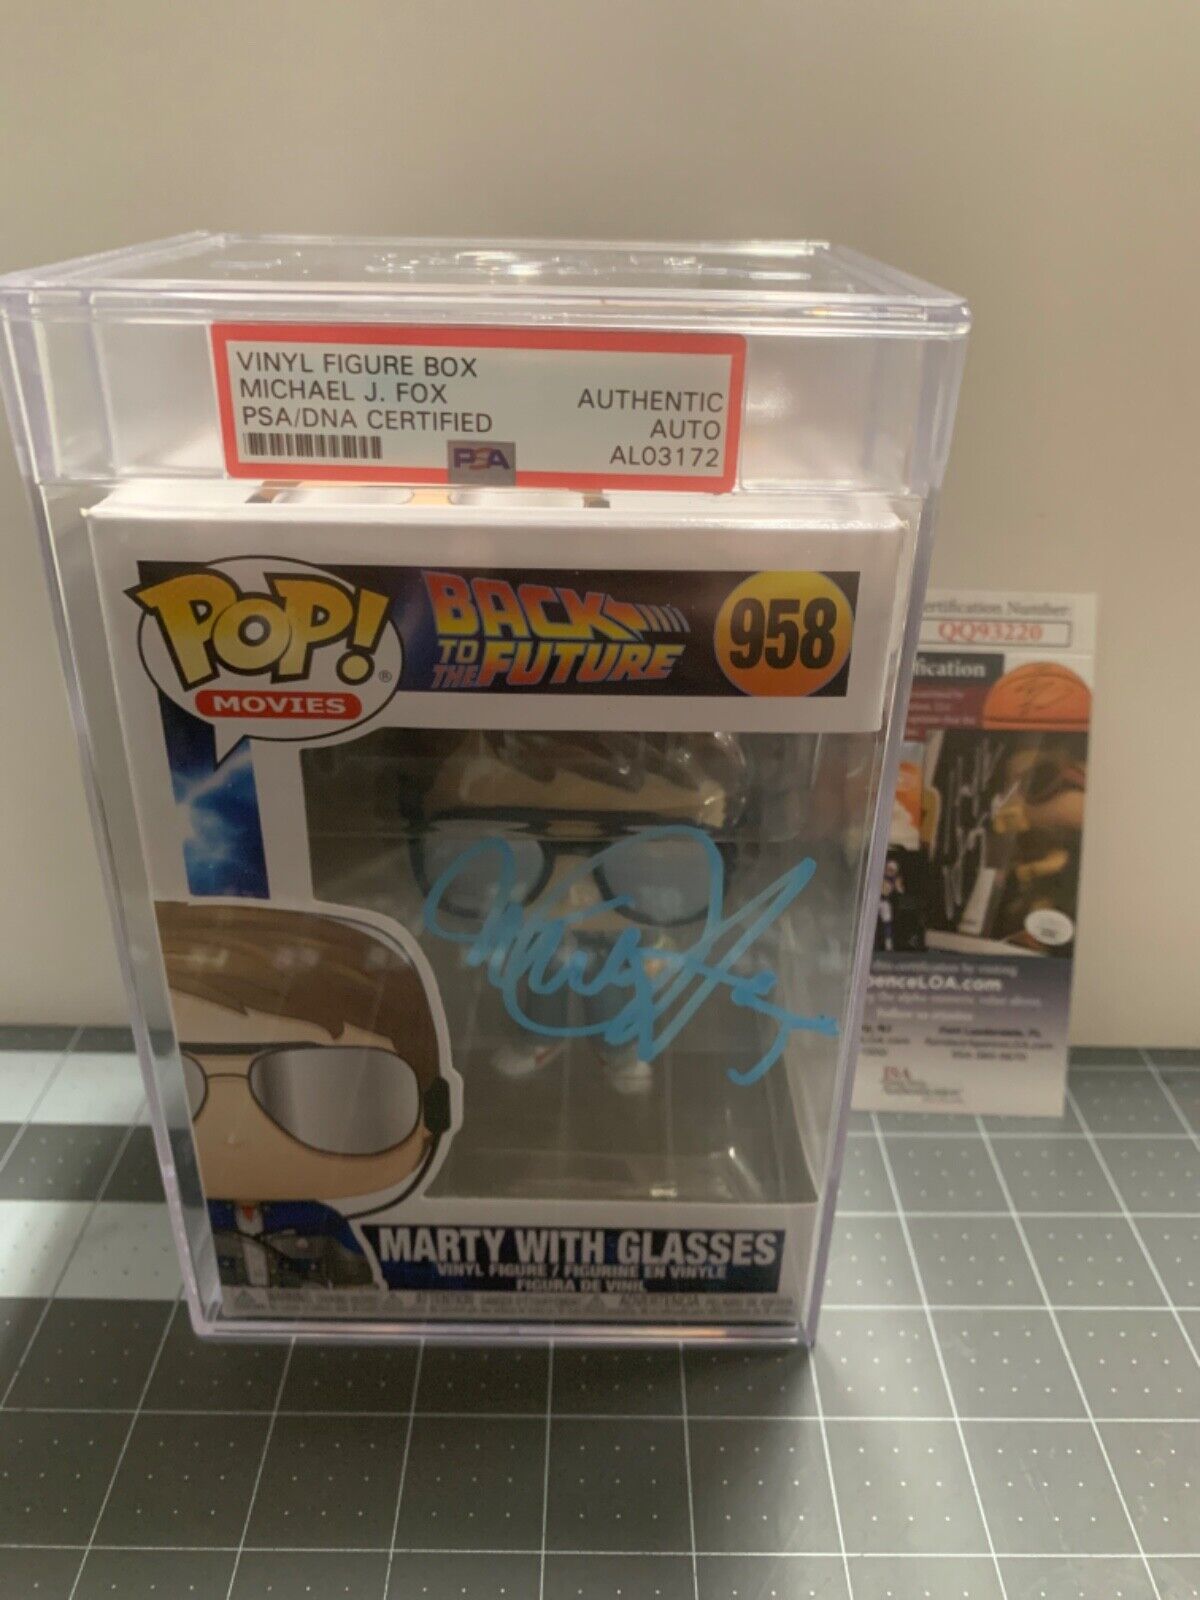 Michael J Fox Signed Funko Pop PSA Slabbed Certified 958 Marty with Glasses